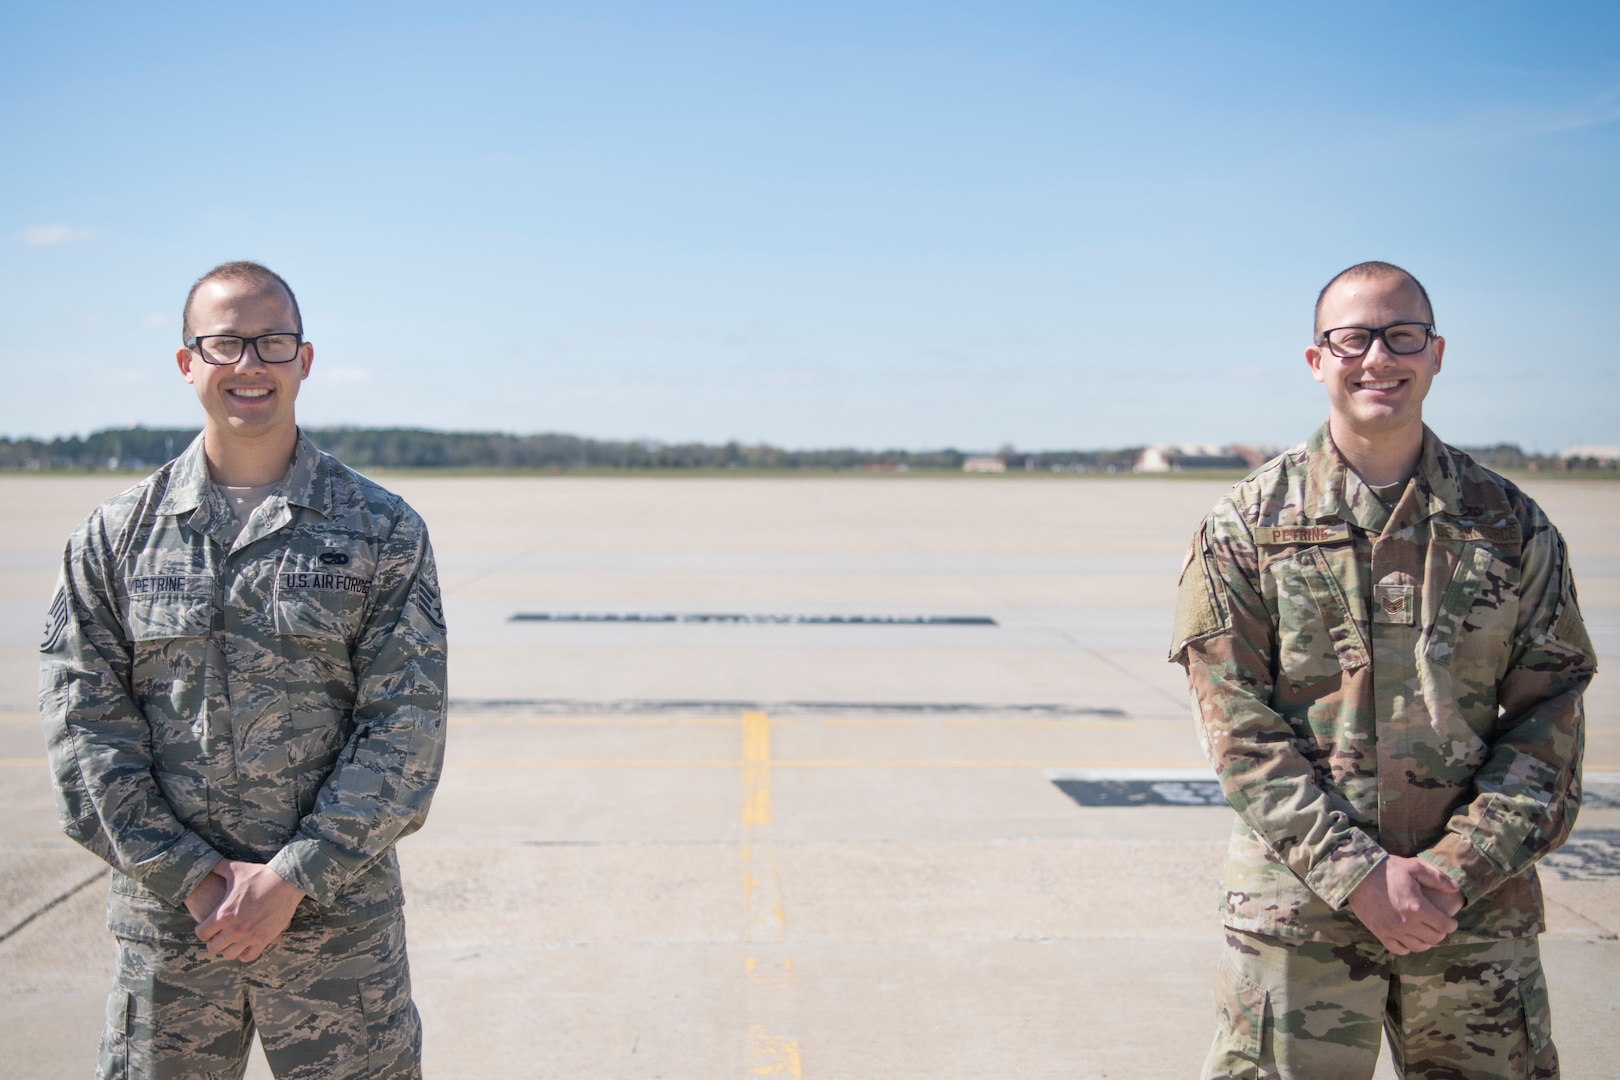 A portrait of identical twin Airmen standing side by side